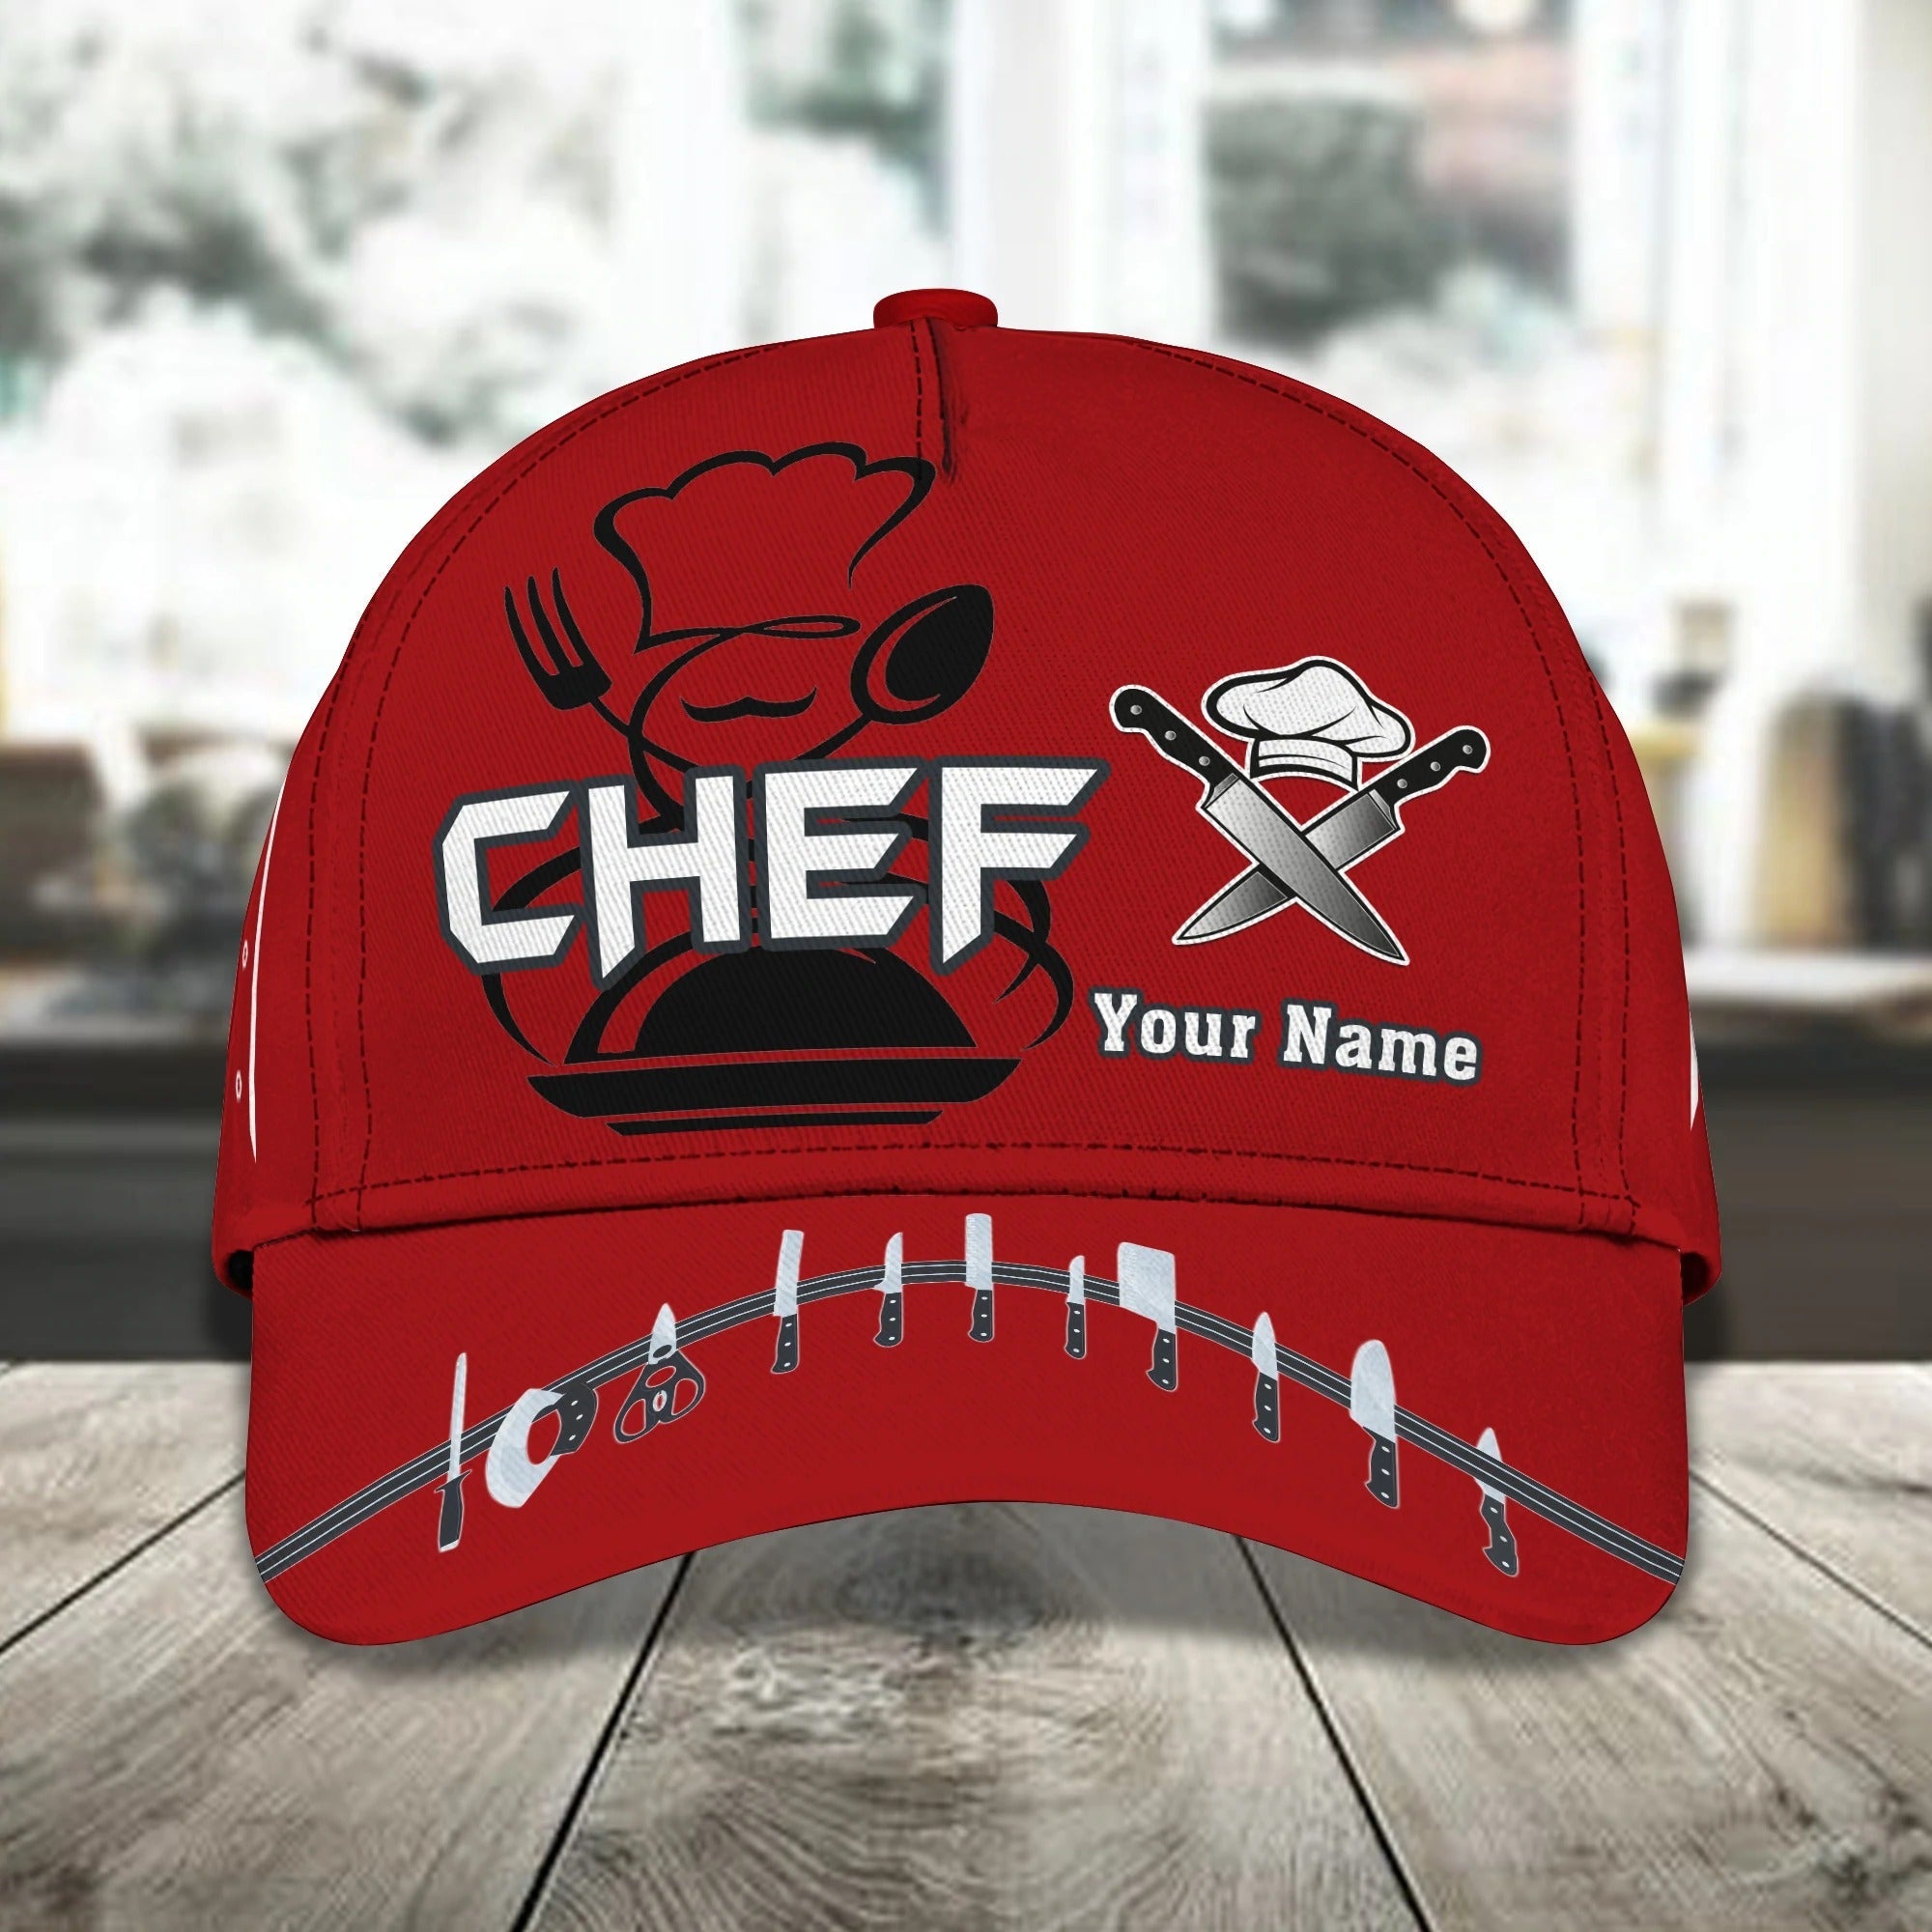 Personalized Master Chef Baseball All Over Print Cap For Men And Women/ Special Cap Hat For Chef